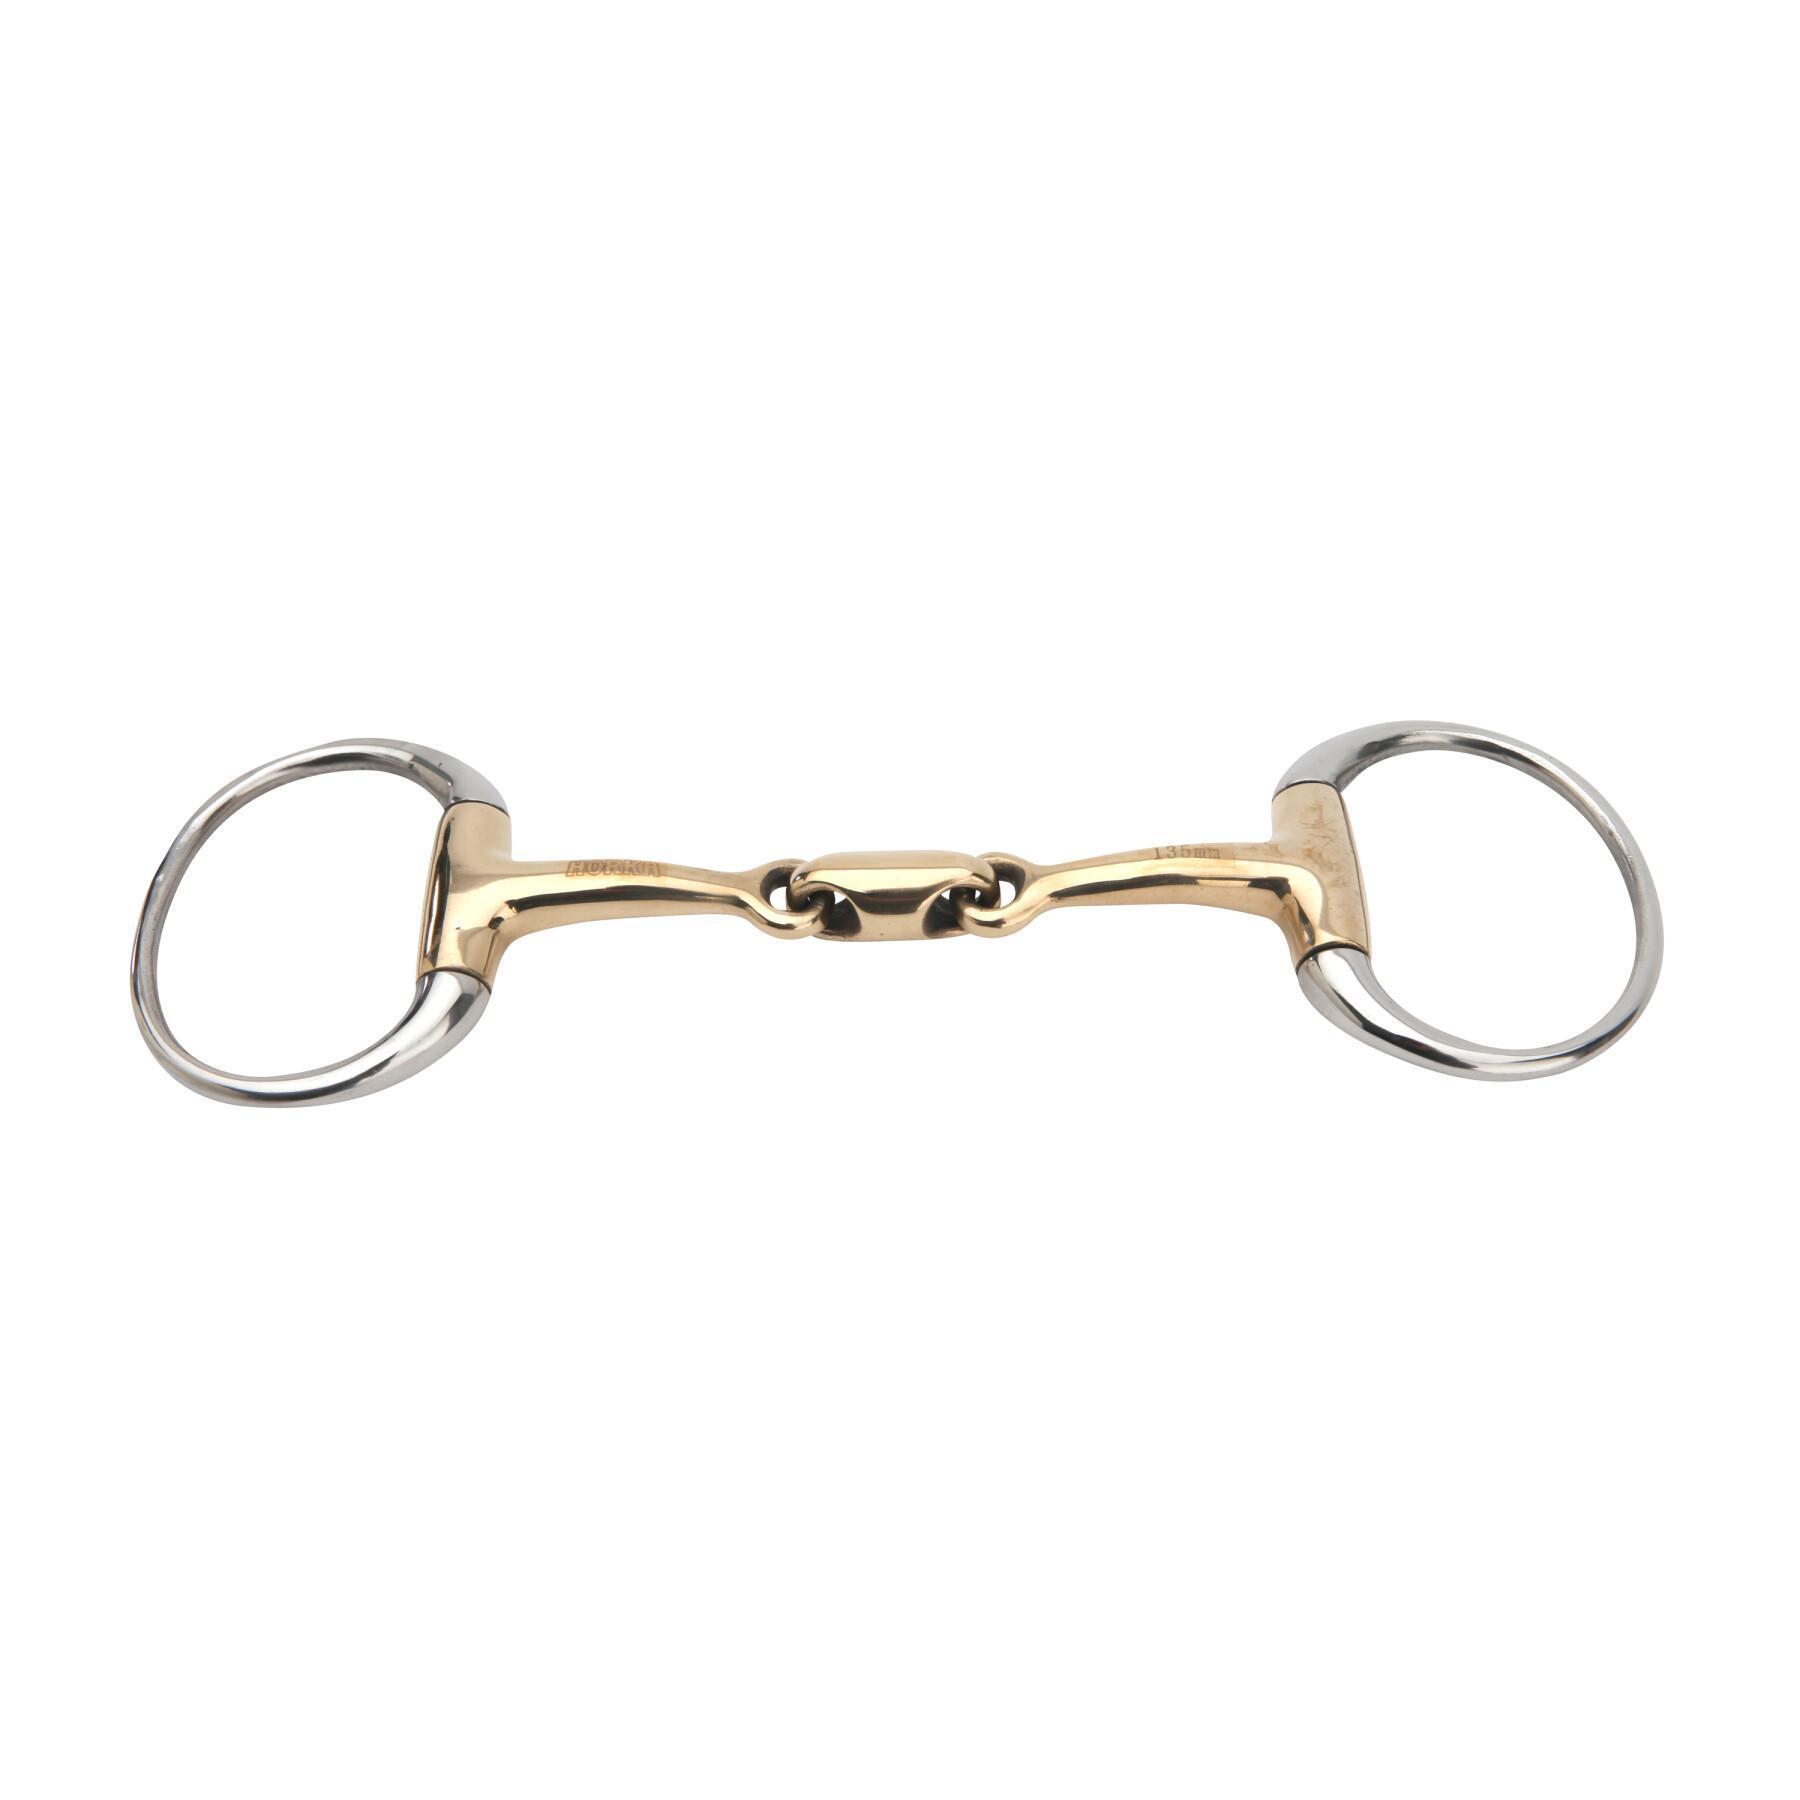 Two-ring snaffle bit with double joint gb Horka